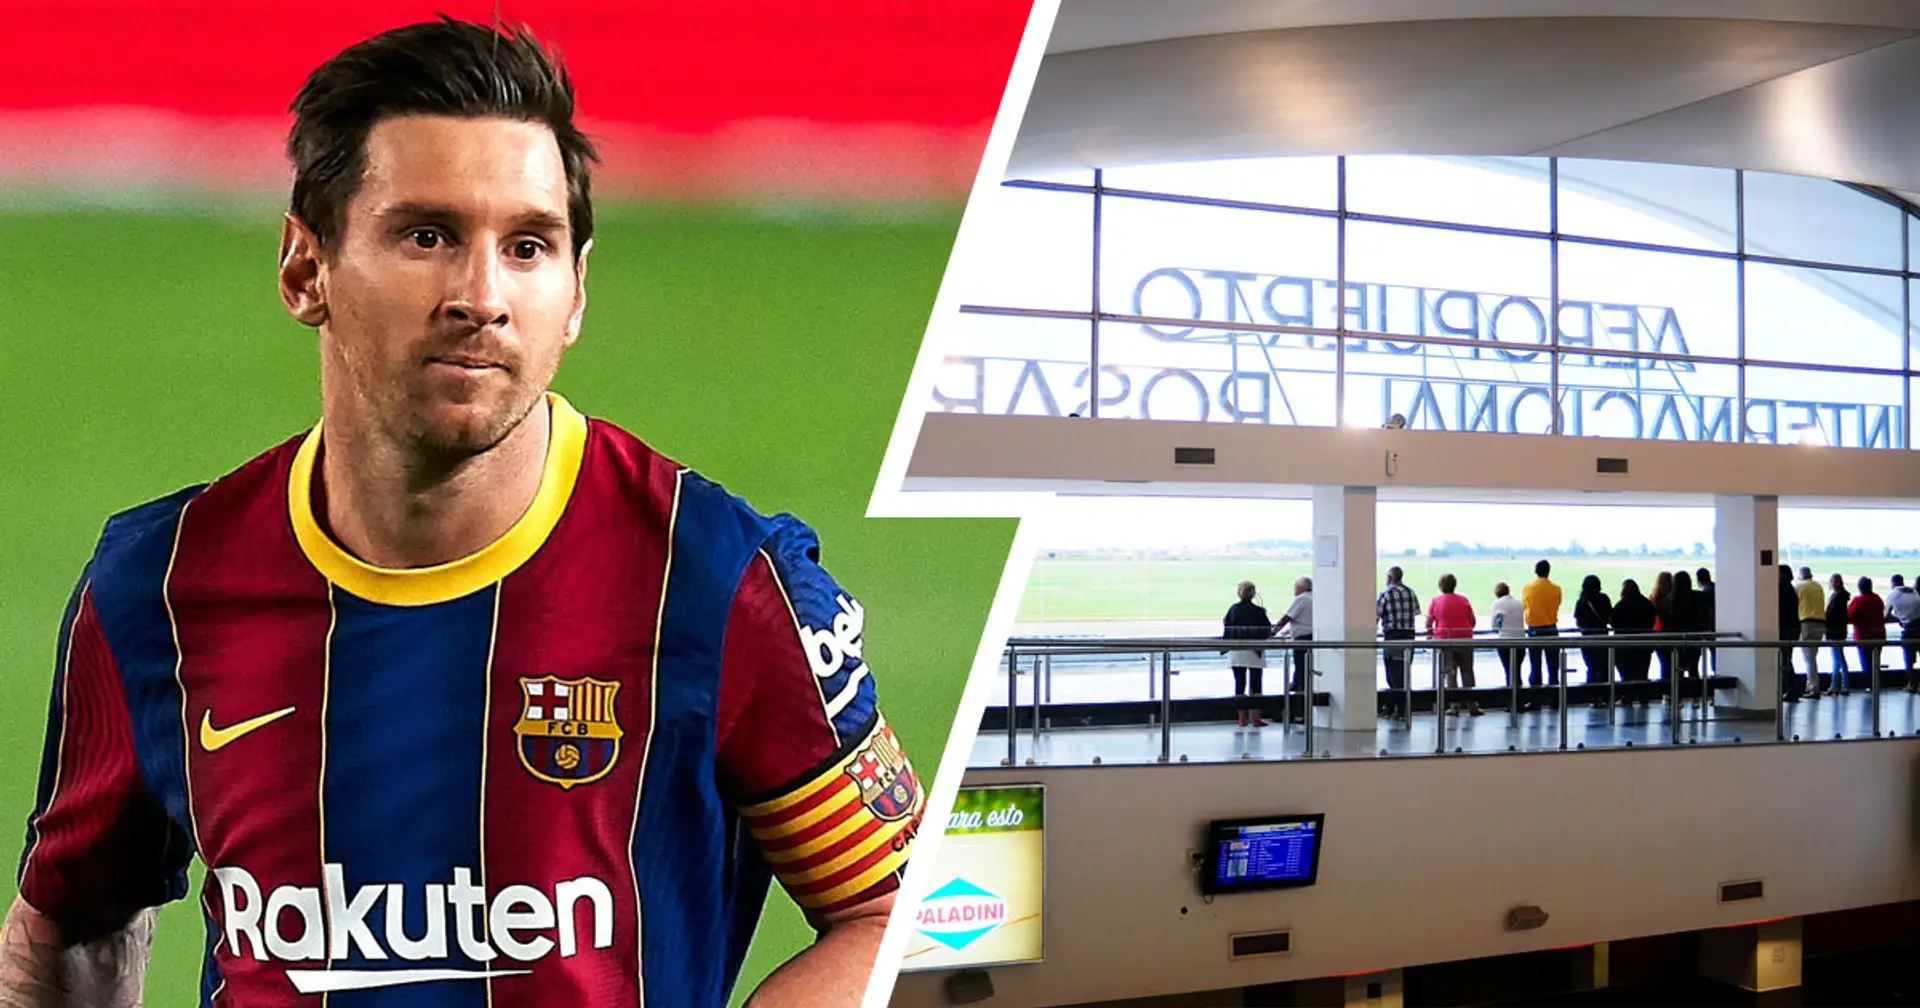 Messi flight delayed after bomb threat at Rosario airport